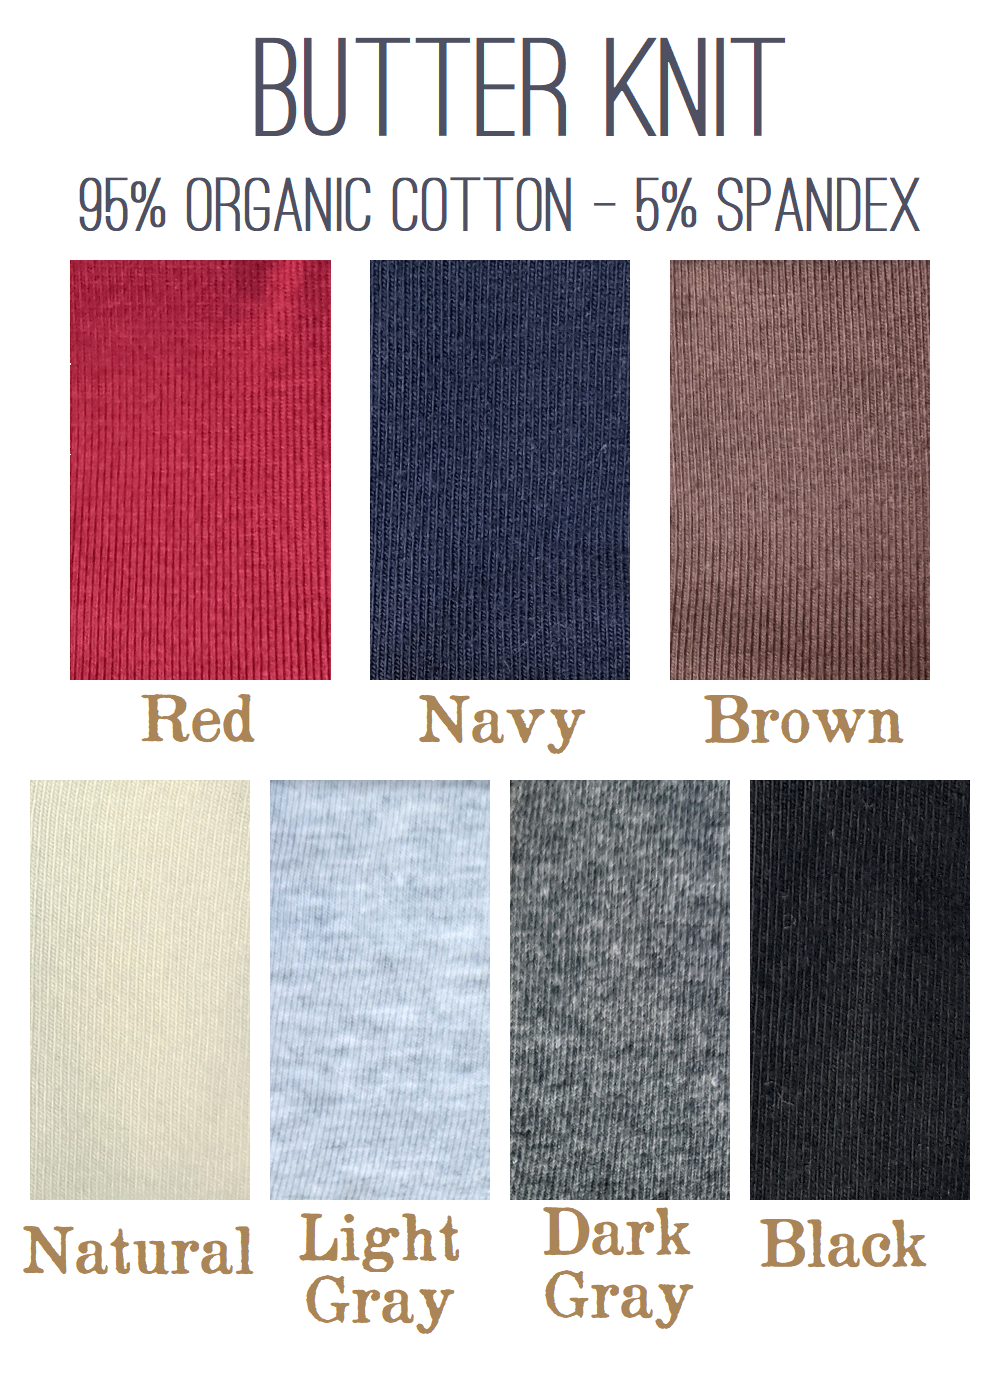 Organic Cotton Butter Knit Fabric Samples